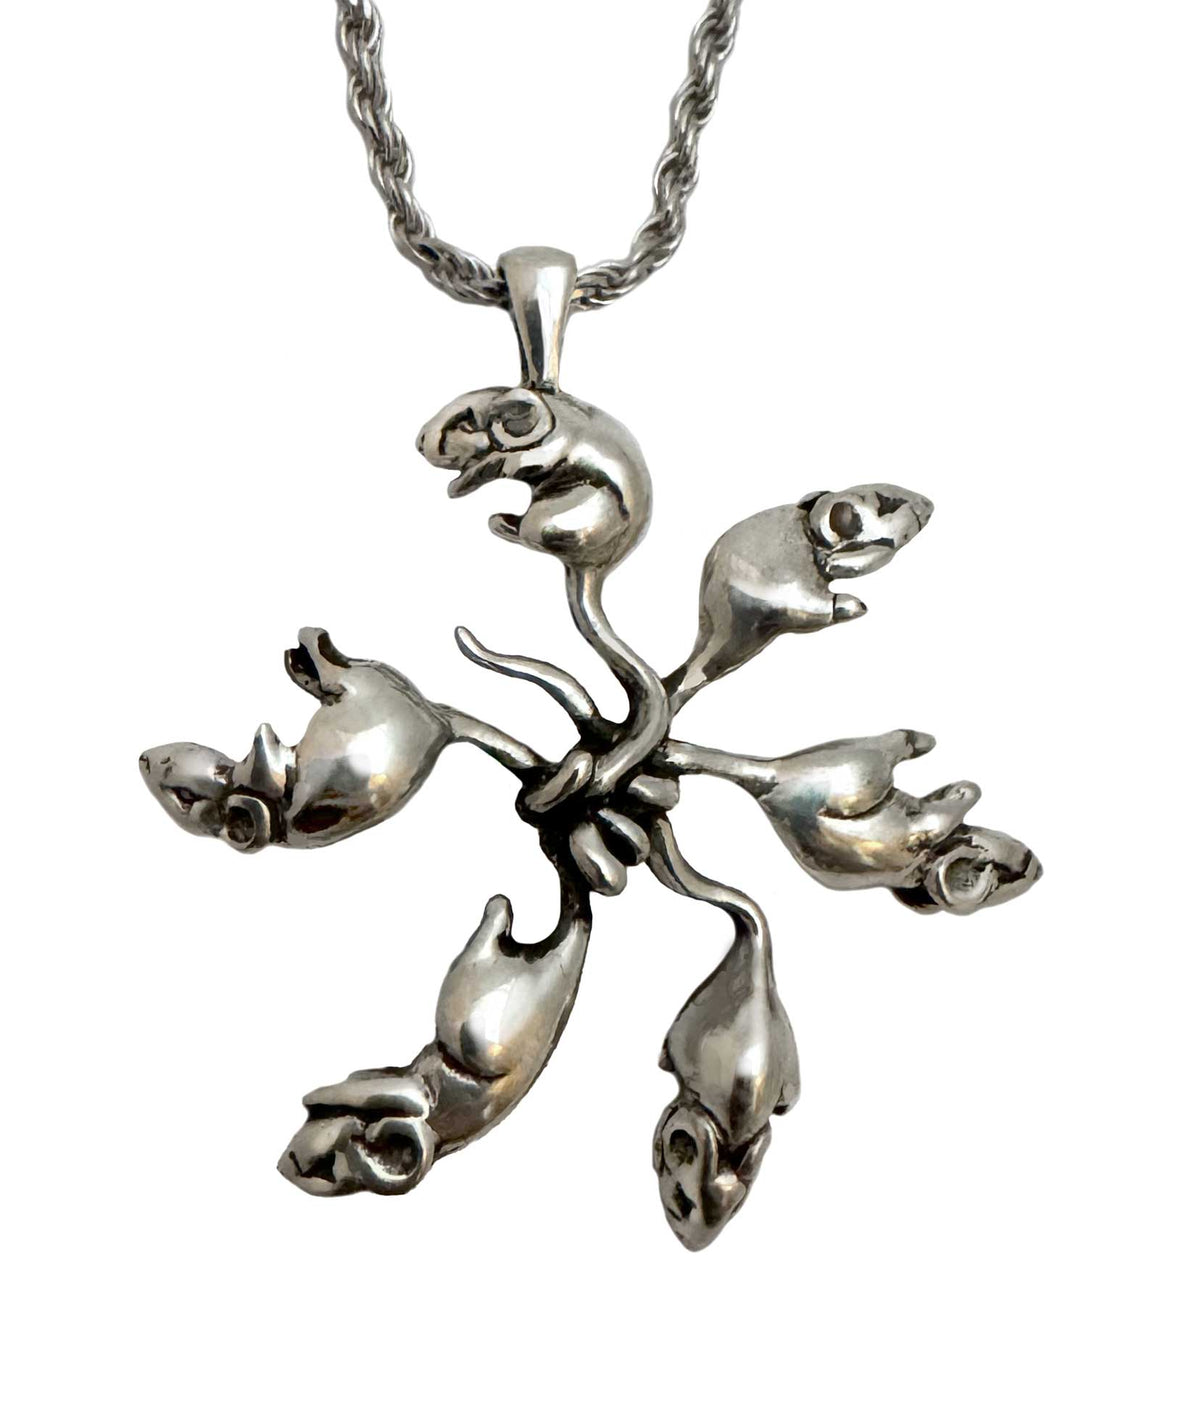 Rat King necklace in silver gold